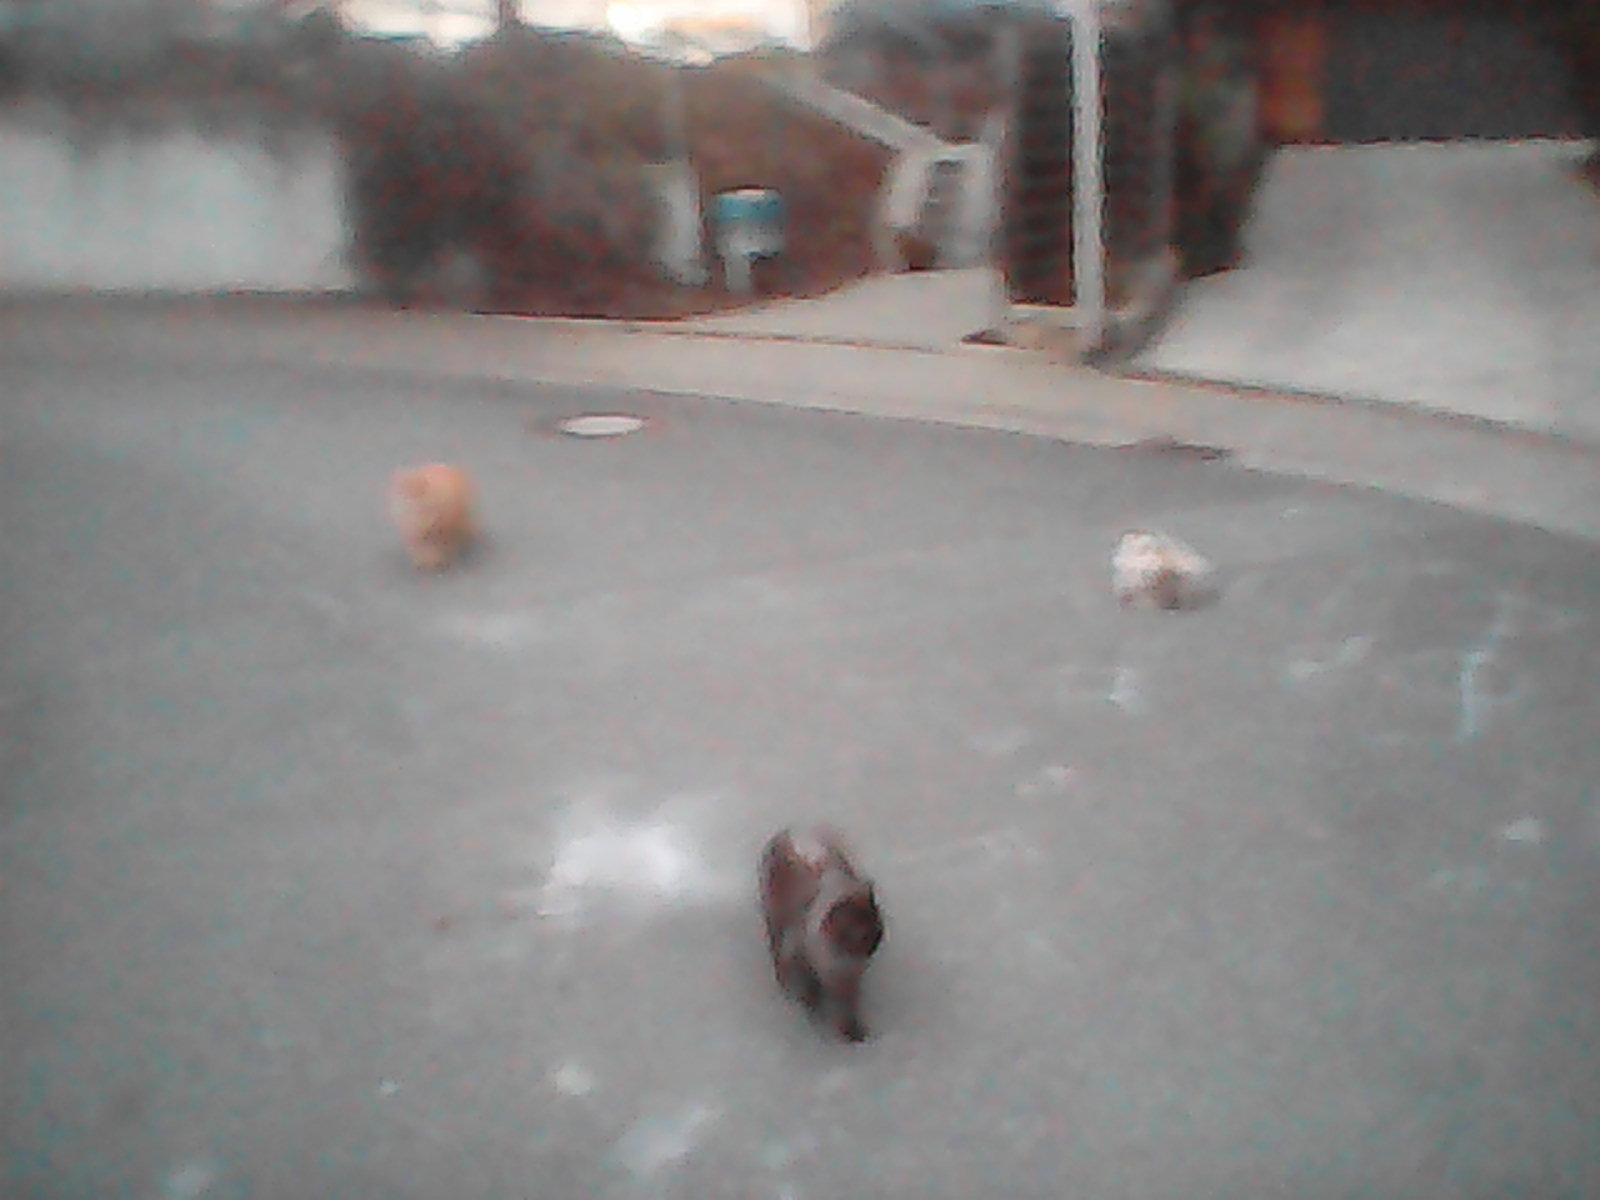 Persian cats on a street